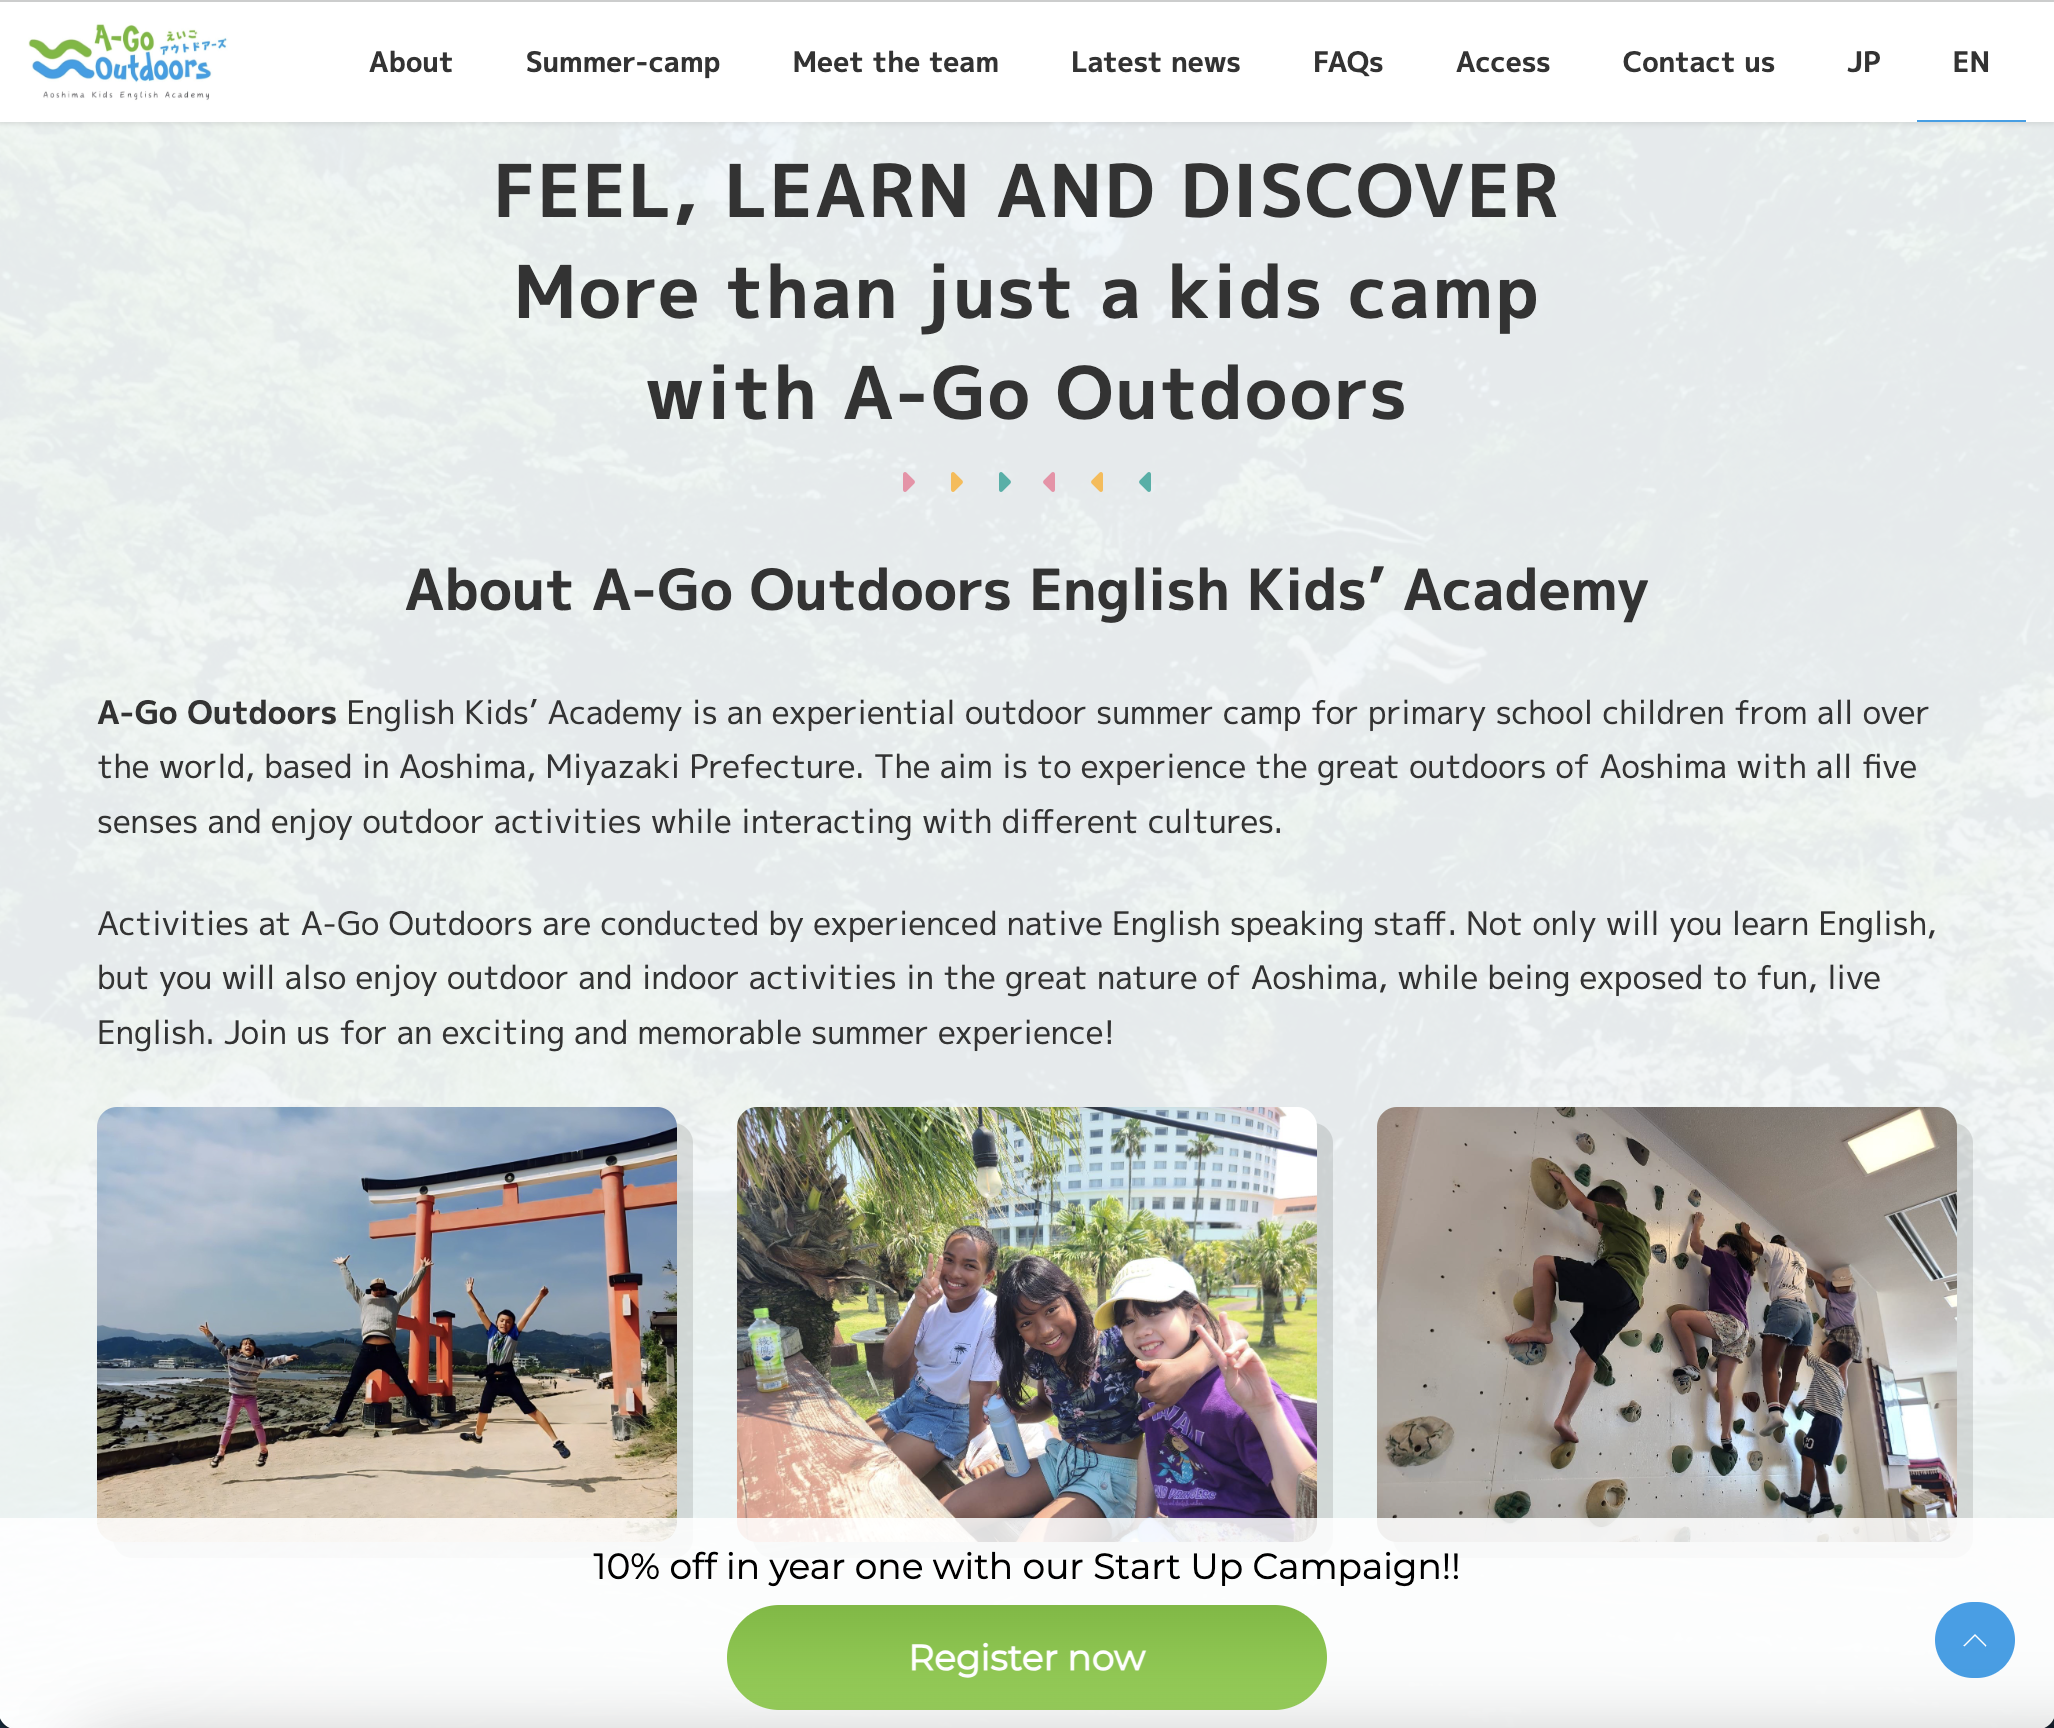 Welcoming Our New ECS User: A-Go Outdoors